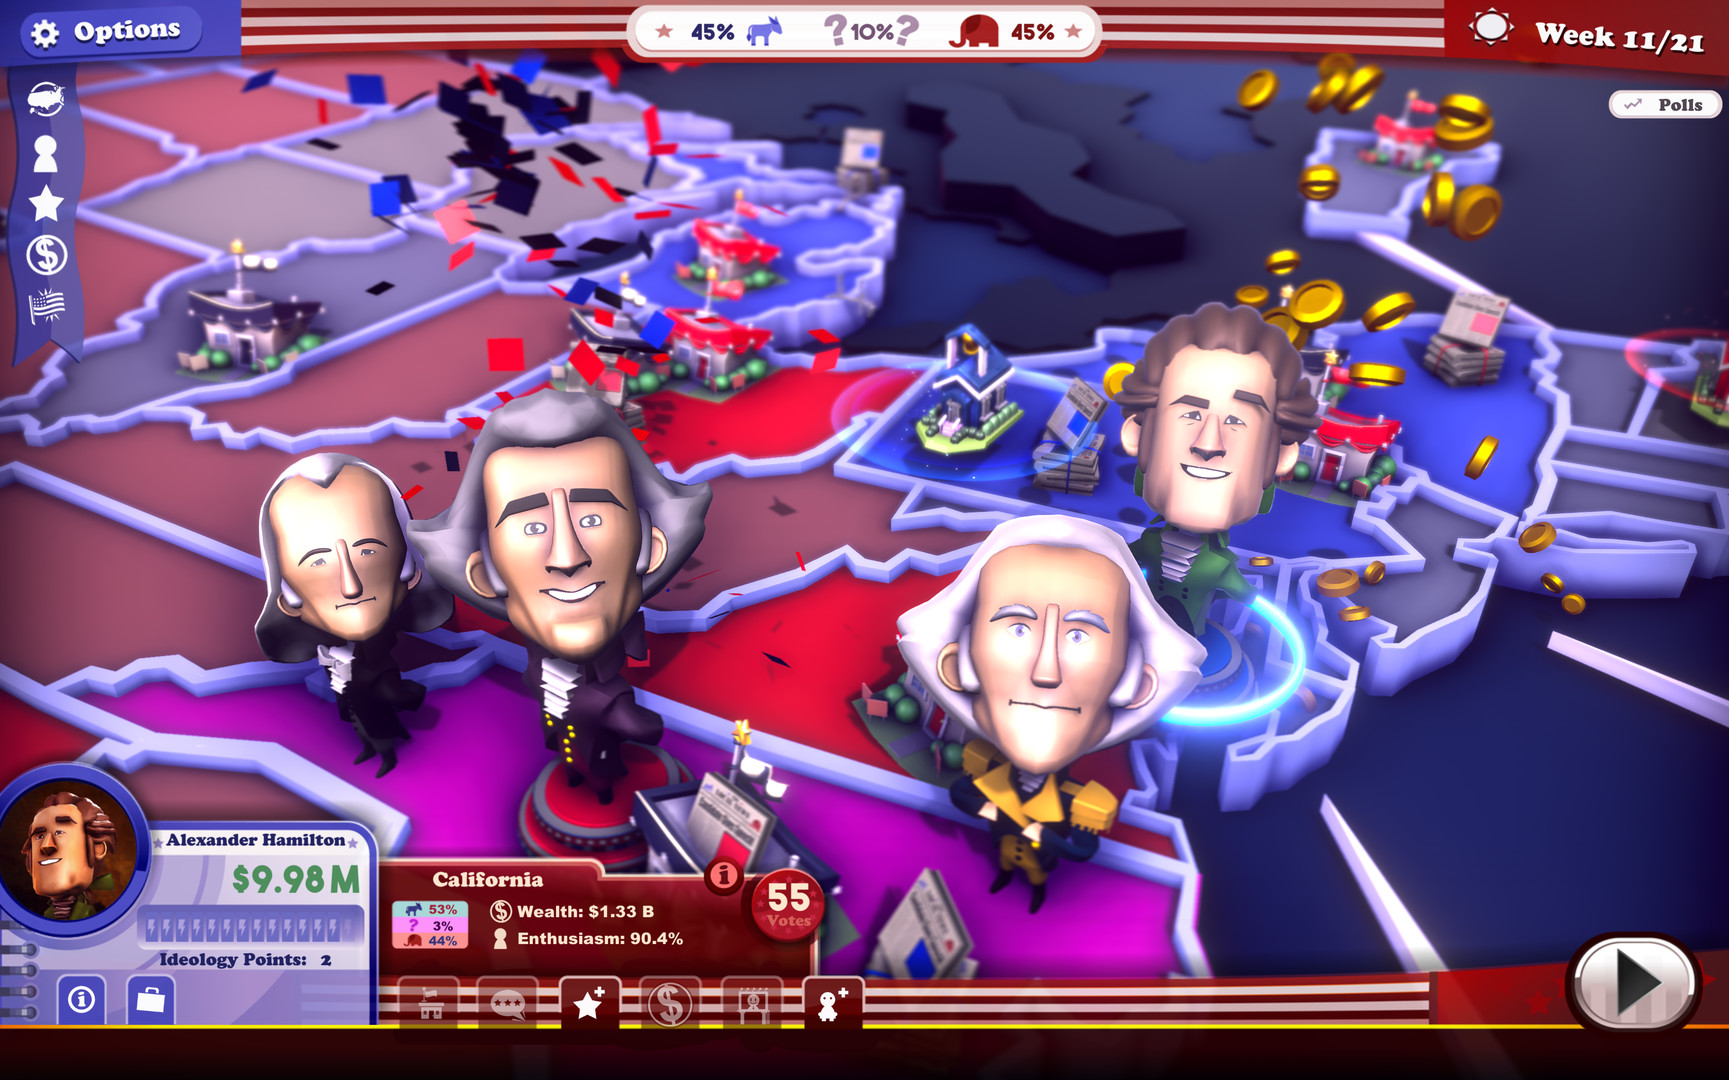 The Political Machine 2020 - The Founding Fathers DLC Steam CD Key 3.94 $